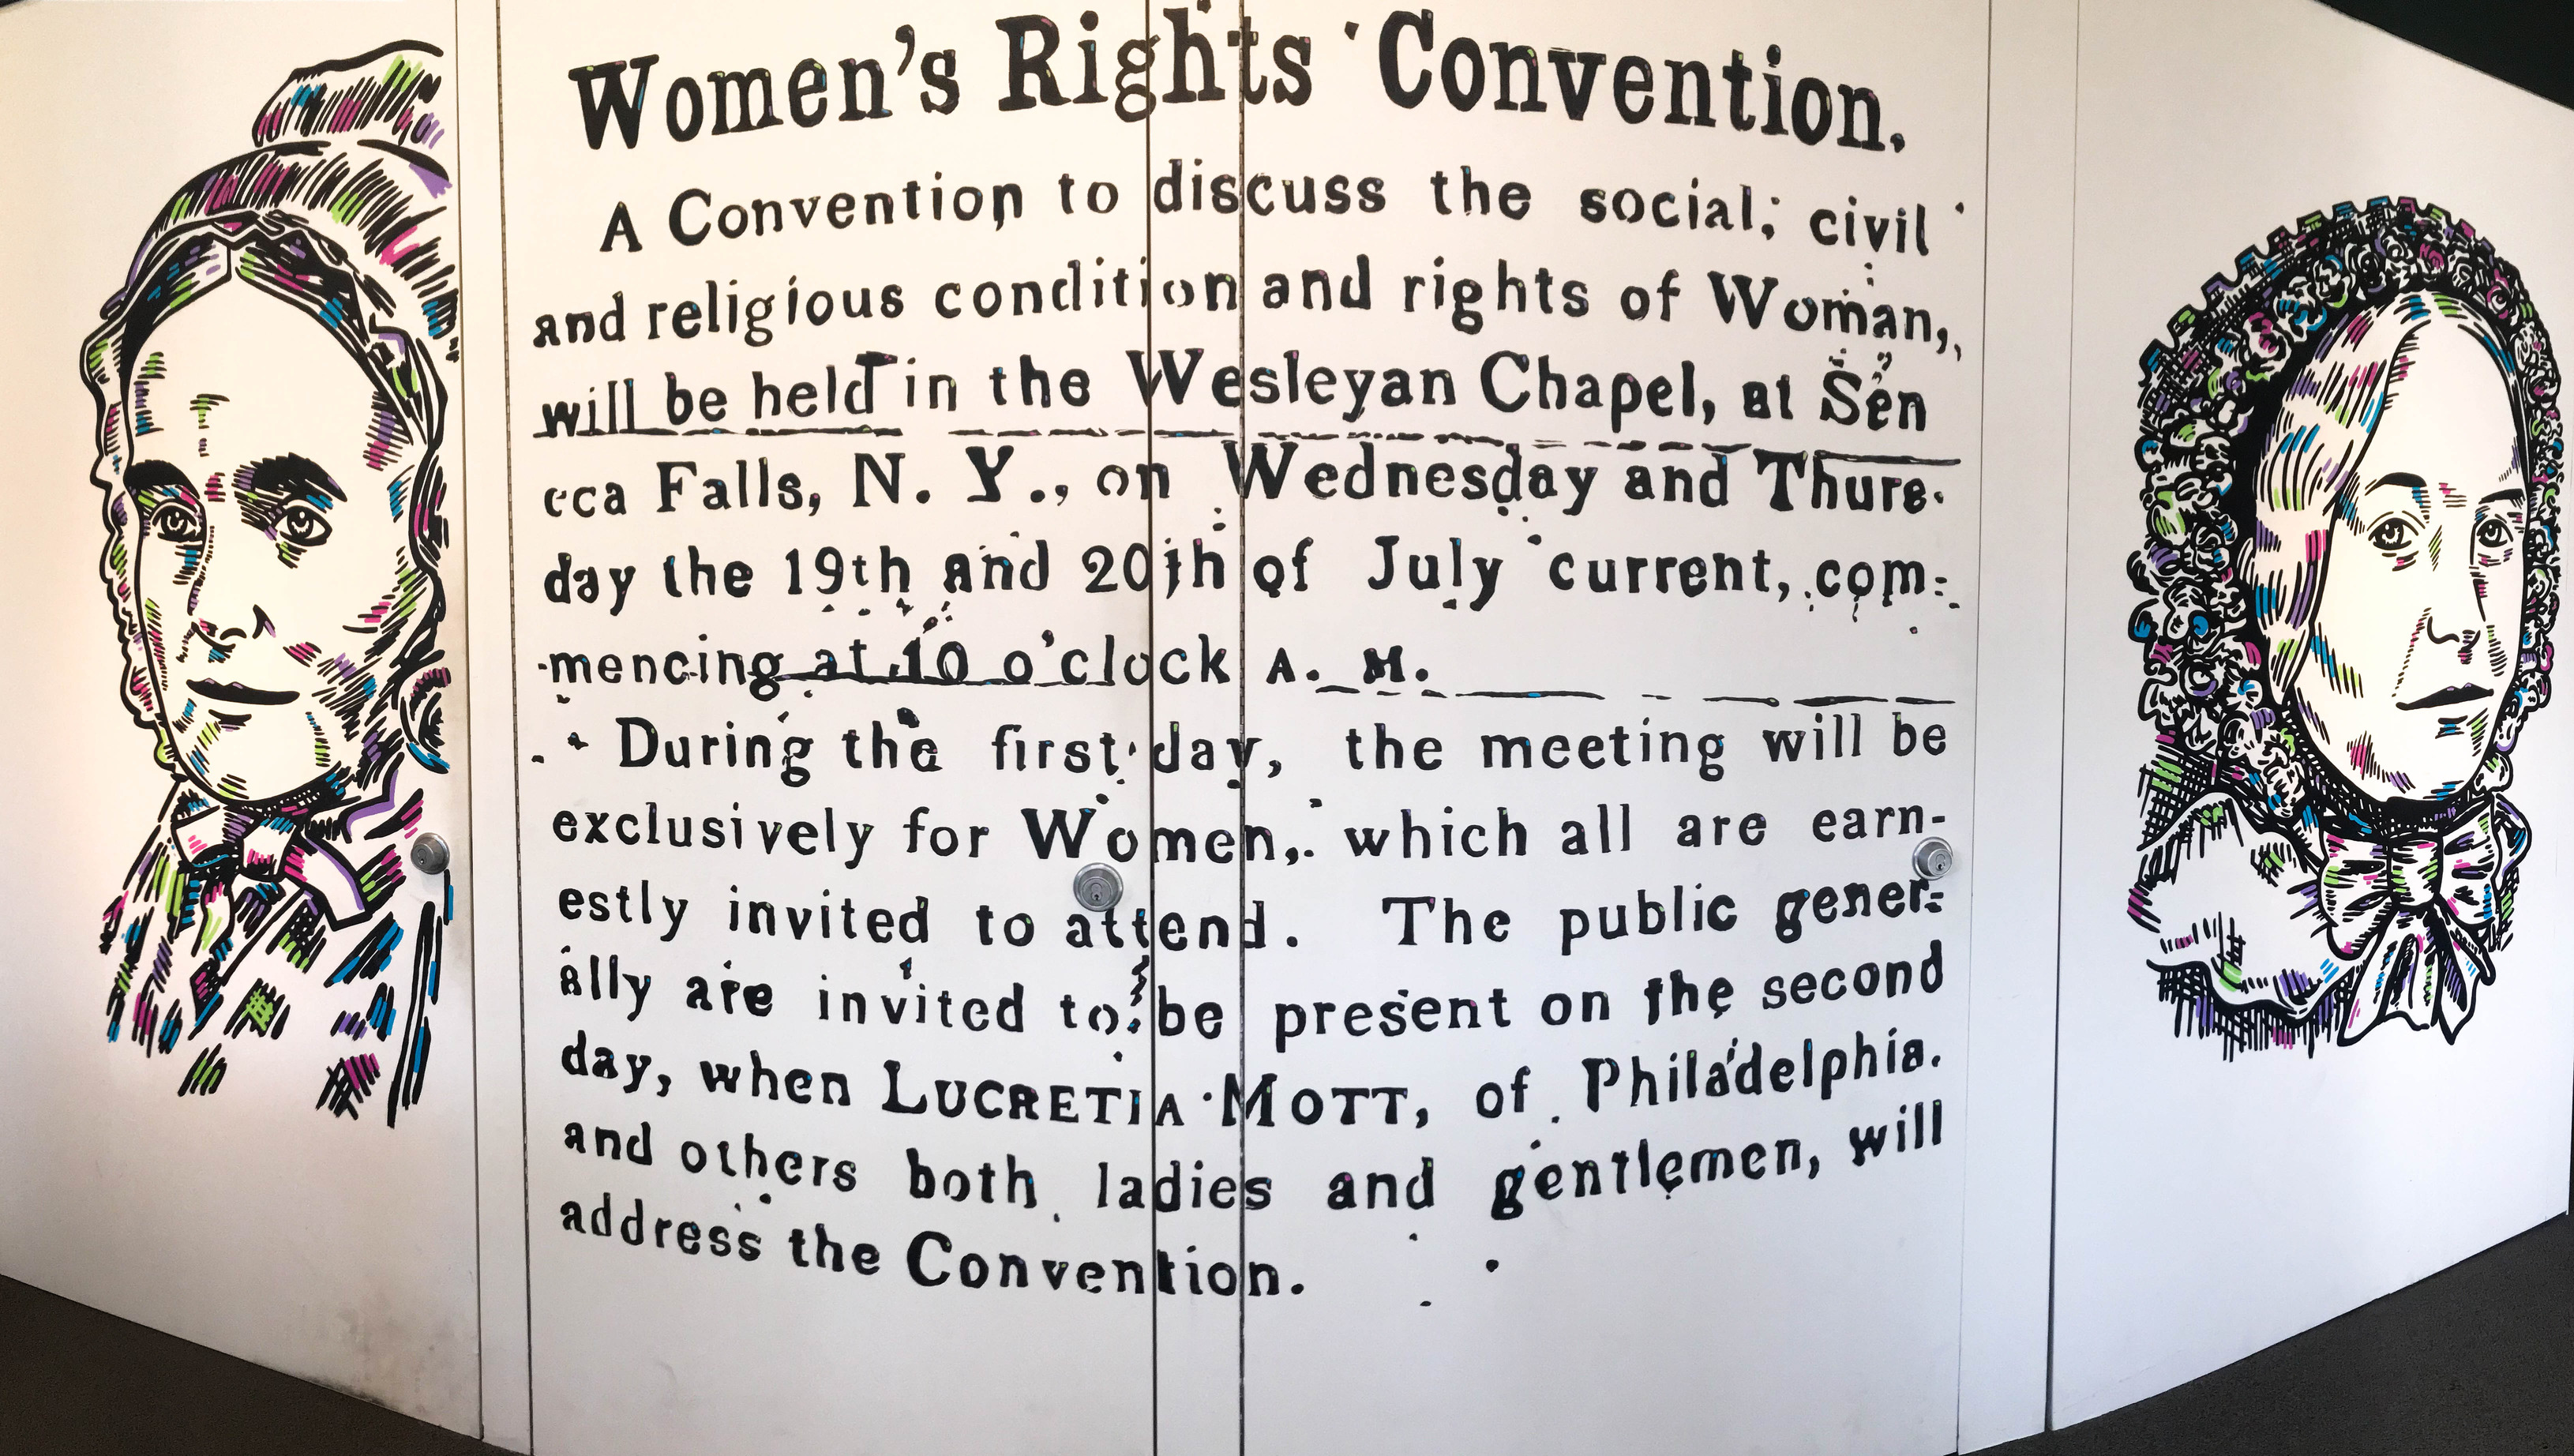 Mural on an interior wall including illustrations of two women and text about the Women's Rights Convention